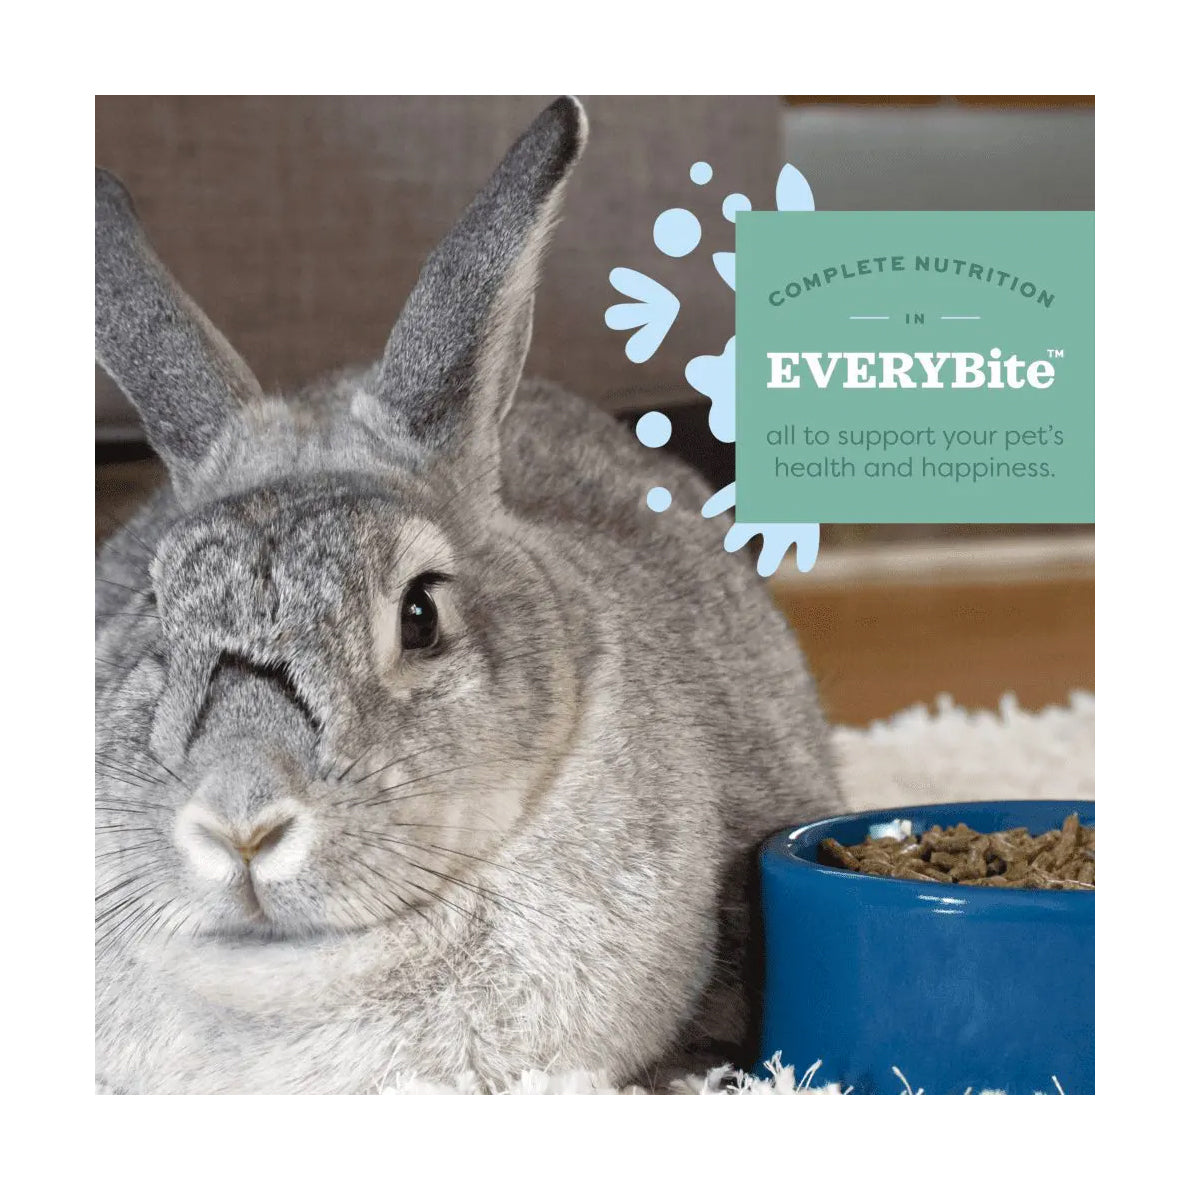 Oxbow Essentials Young Rabbit Food 2.25kg